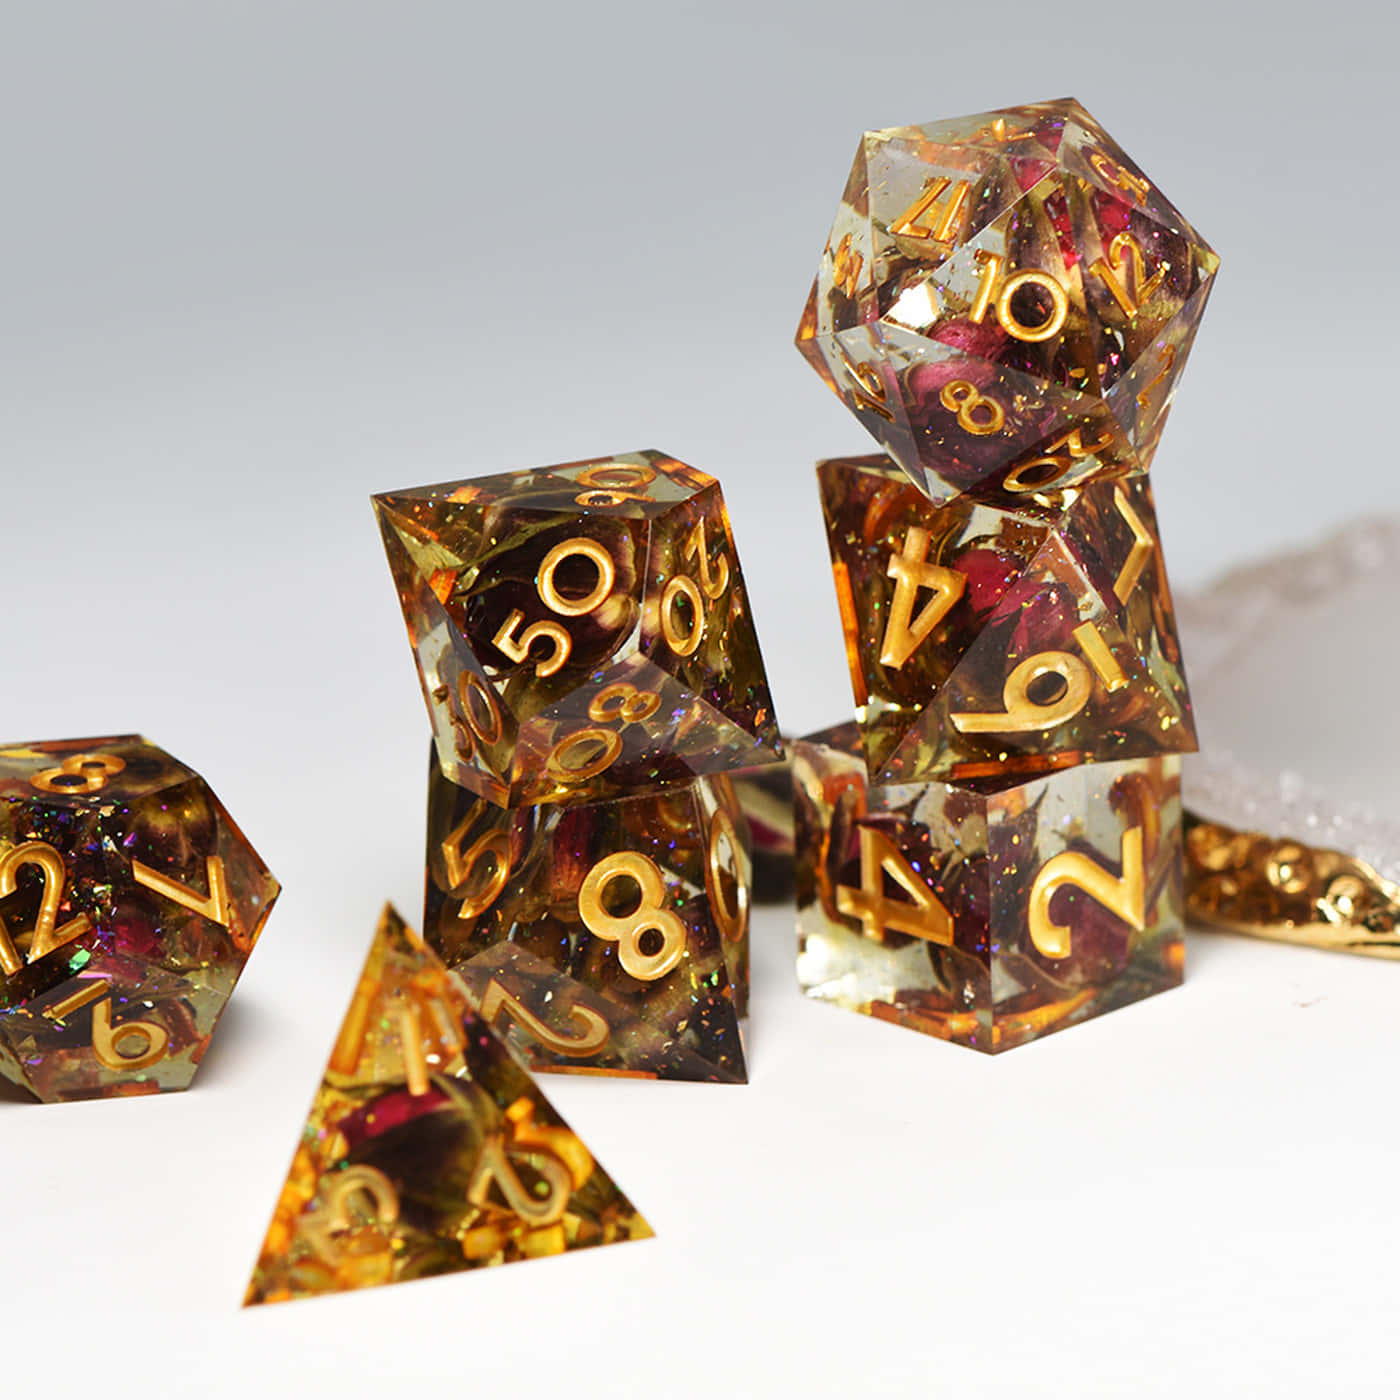 A Set Of Gold And Gold Dice With Numbers On Them